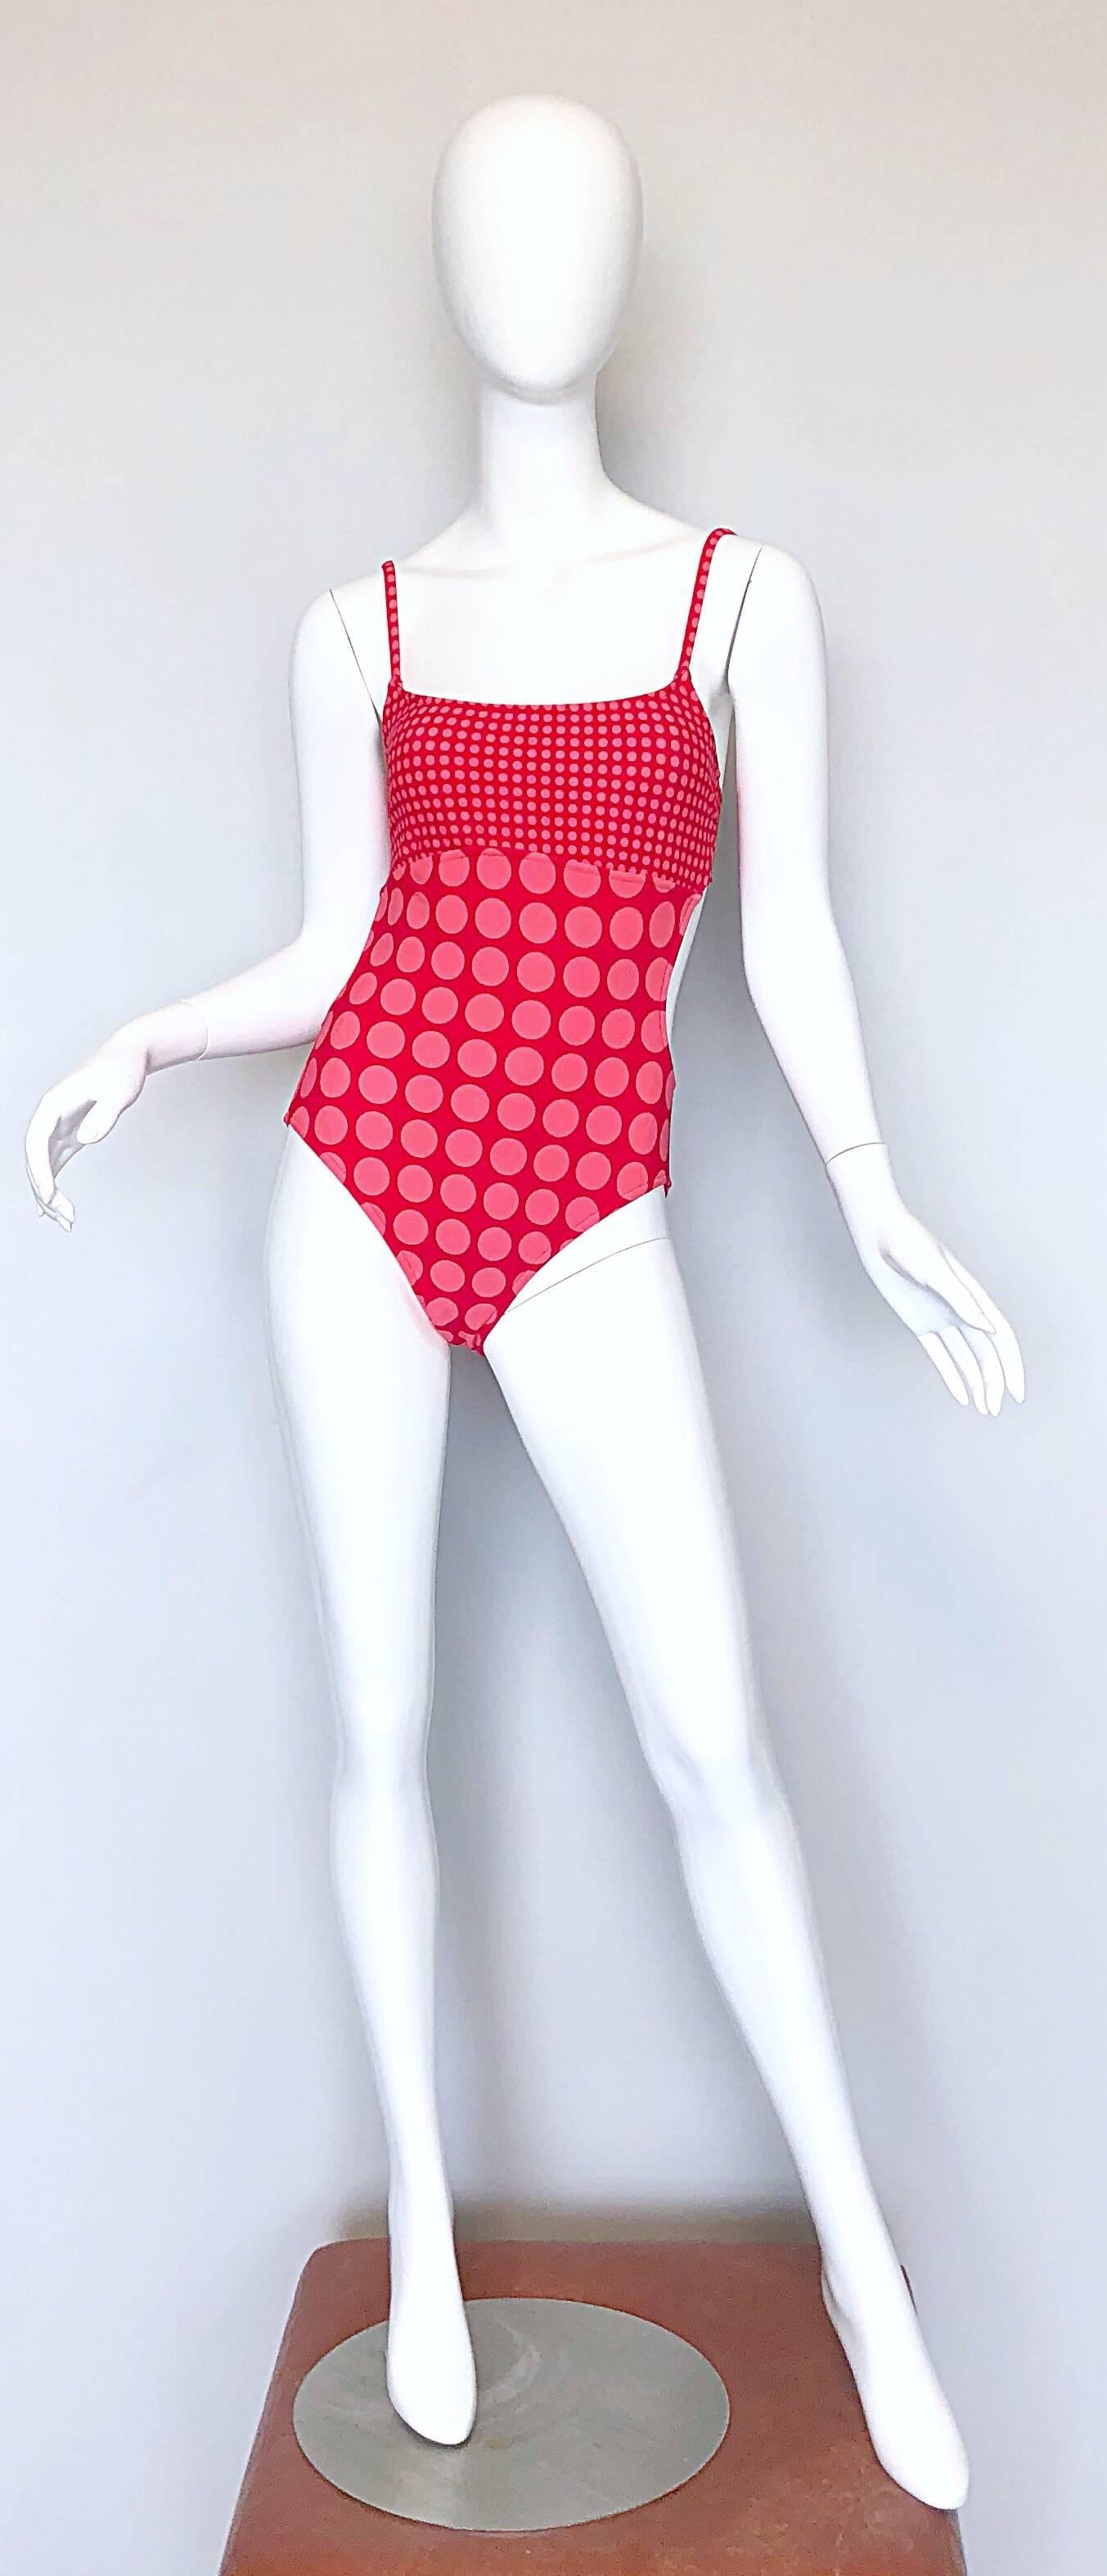 Sexy 90s does 60s BILL BLASS pink and red polka dot cut-out one piece monkini swimsuit or bodysuit! Features an op-art polka dot print with mini dots on the bust, and flattering larger one on the body. Ties in the back, so can accomodate an array of